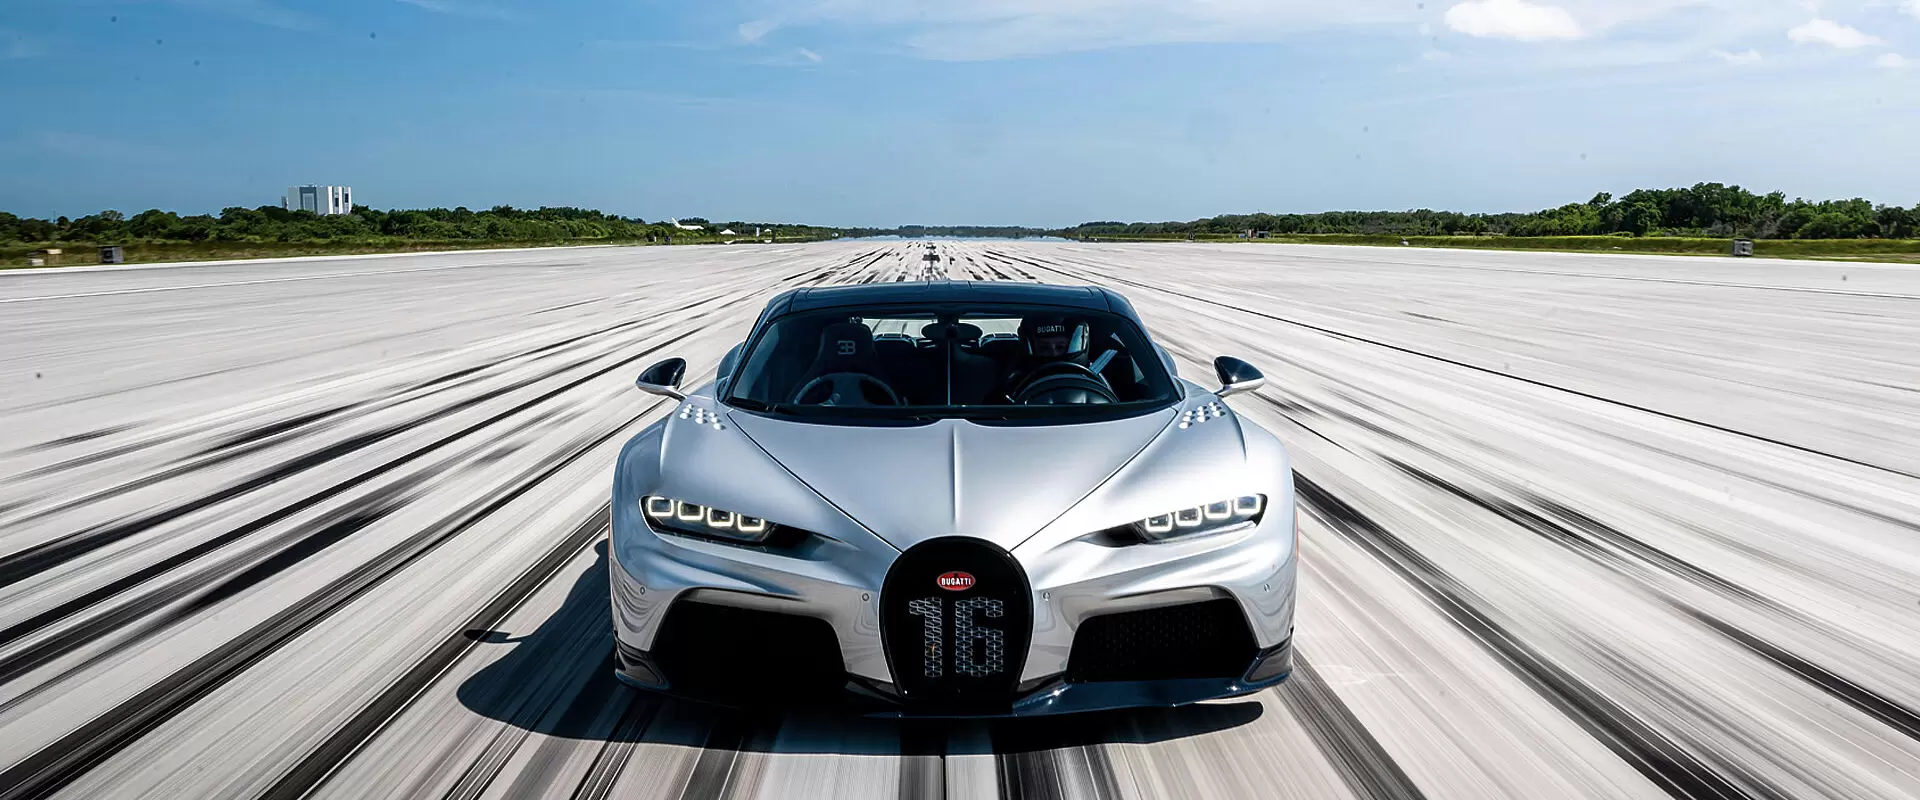 FINDING 400: AN INCOMPARABLE BUGATTI EXPERIENCE